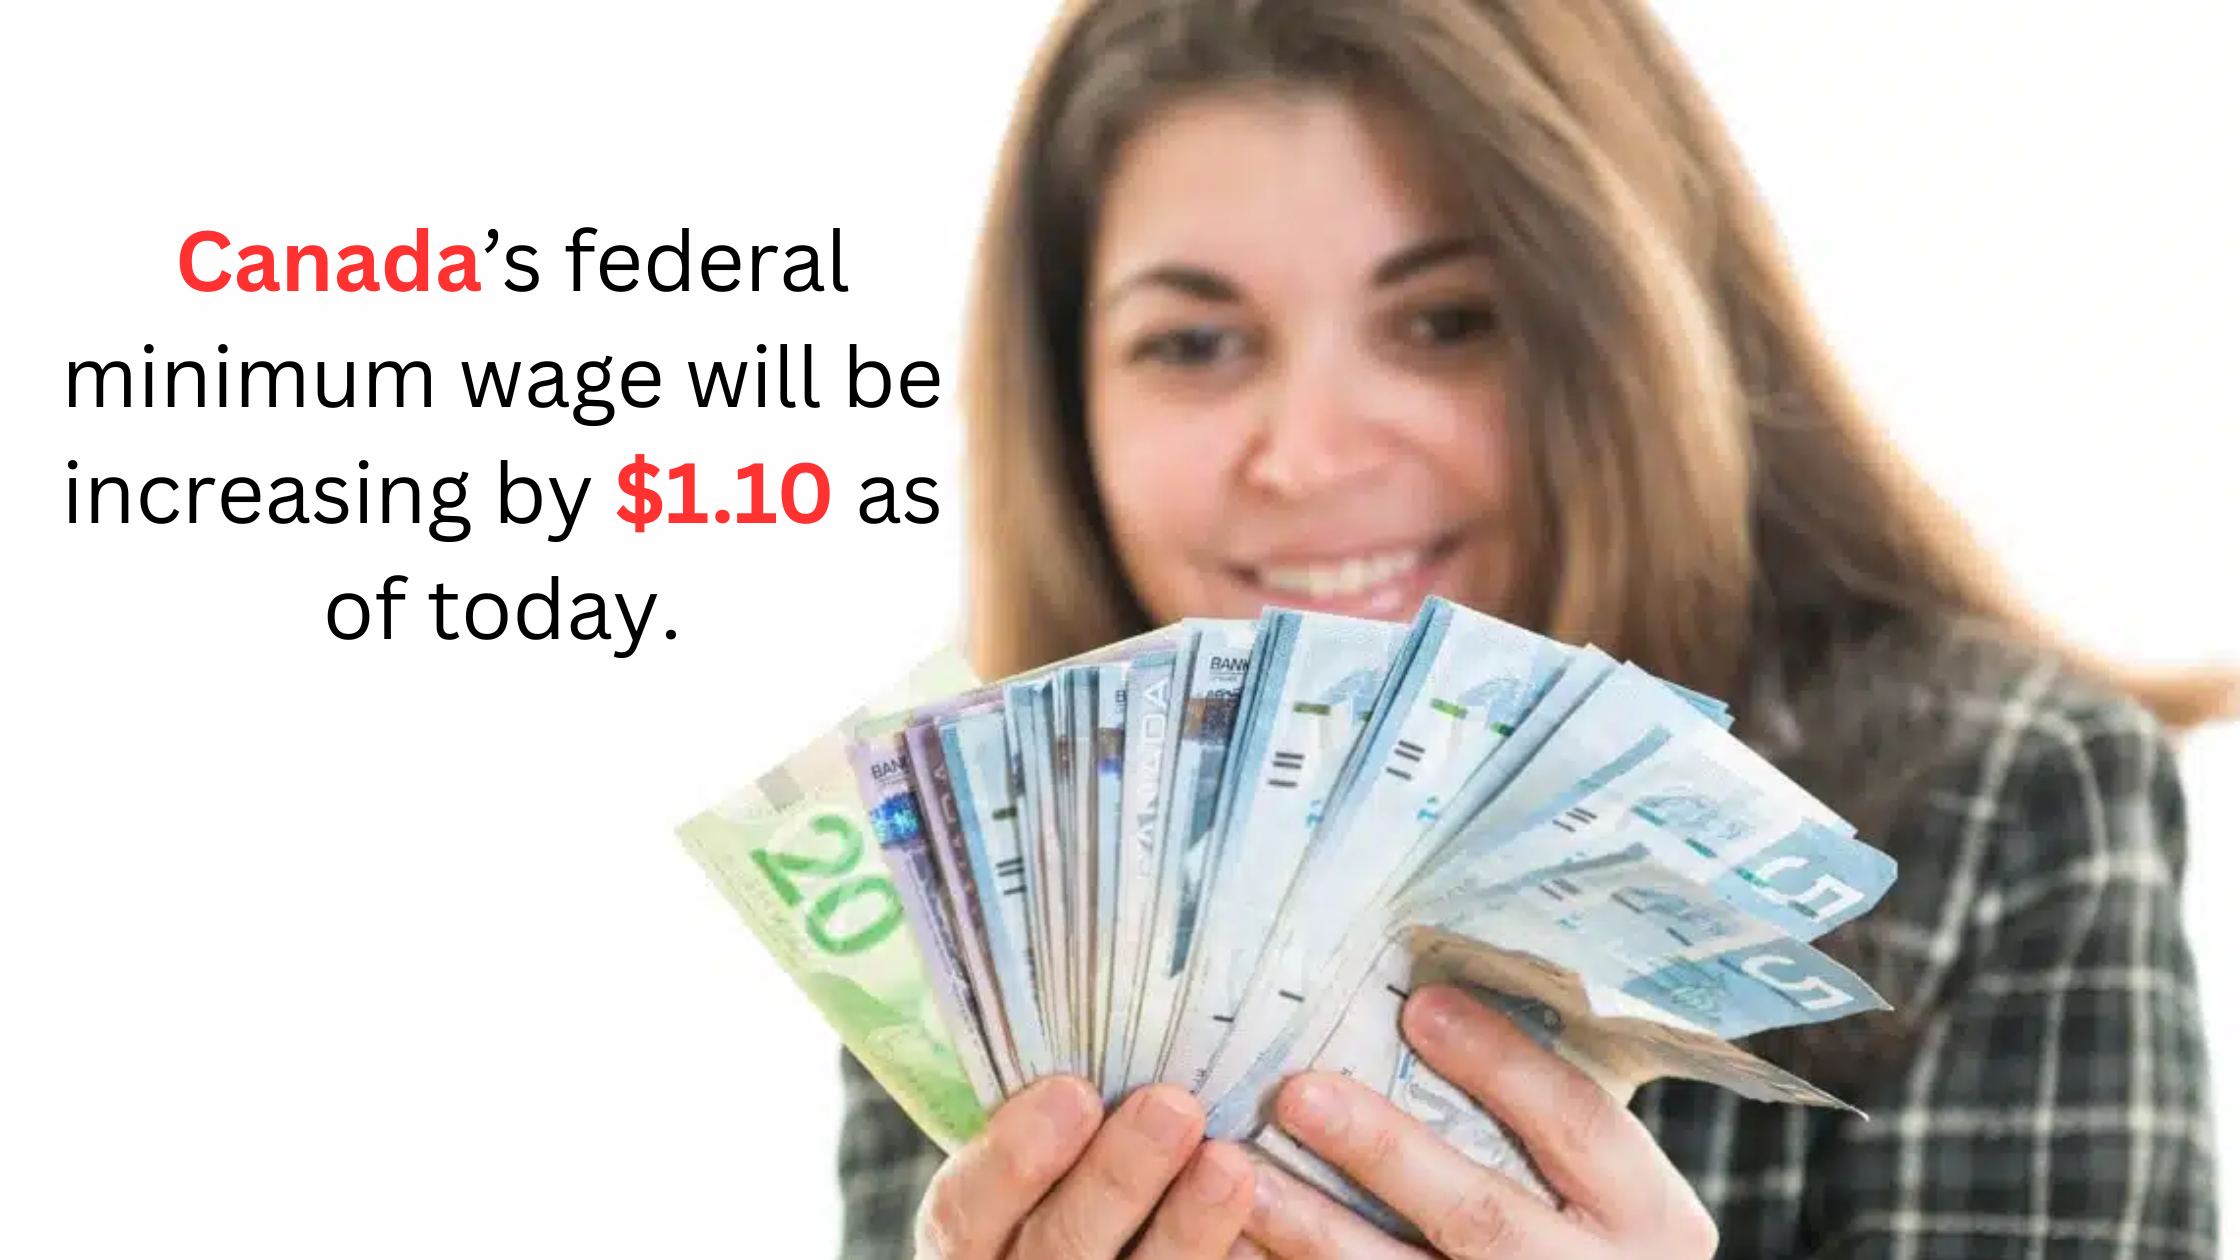 Canada’s federal minimum wage will be increasing by $1.10 as of today